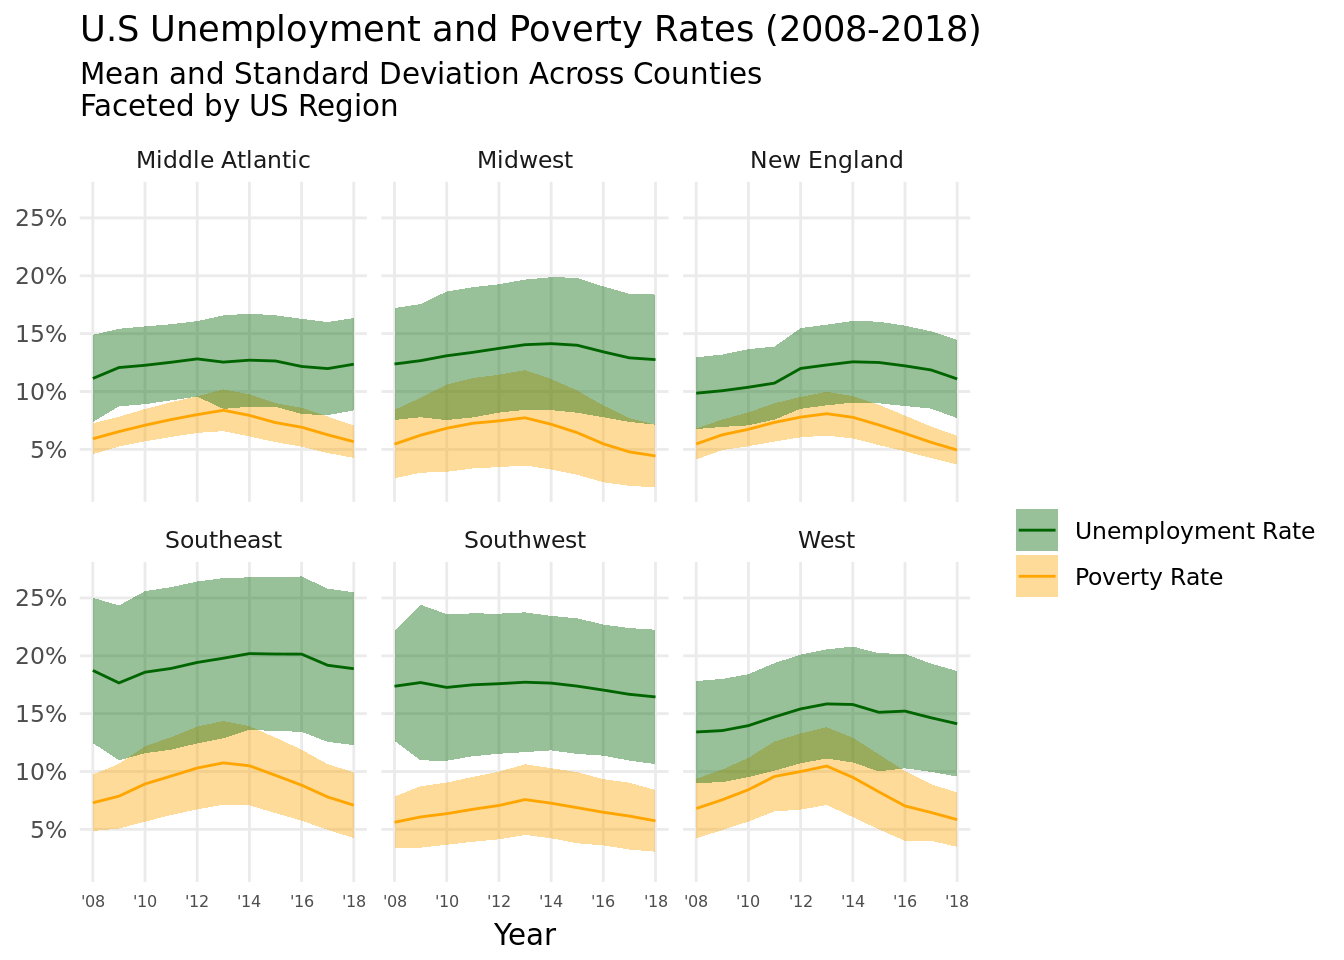 Average Unemployment Rate and Poverty Rate from 2008 to 2018 faceted across 6 regions of the U.S (Middle Atlantic, Midwest, New England, Southeast, Southwest, West), with standard deviations added. The variation for poverty and unemployment rate was higher for the Southeast, Southwest, and the Midwest, and appeared not to change much over time. Poverty generally increased after 2008 for five years before decreasing again, while unemployment changed far less, sometimes following the same trend, such as in the West, sometimes even decreasing as in the Southwest.